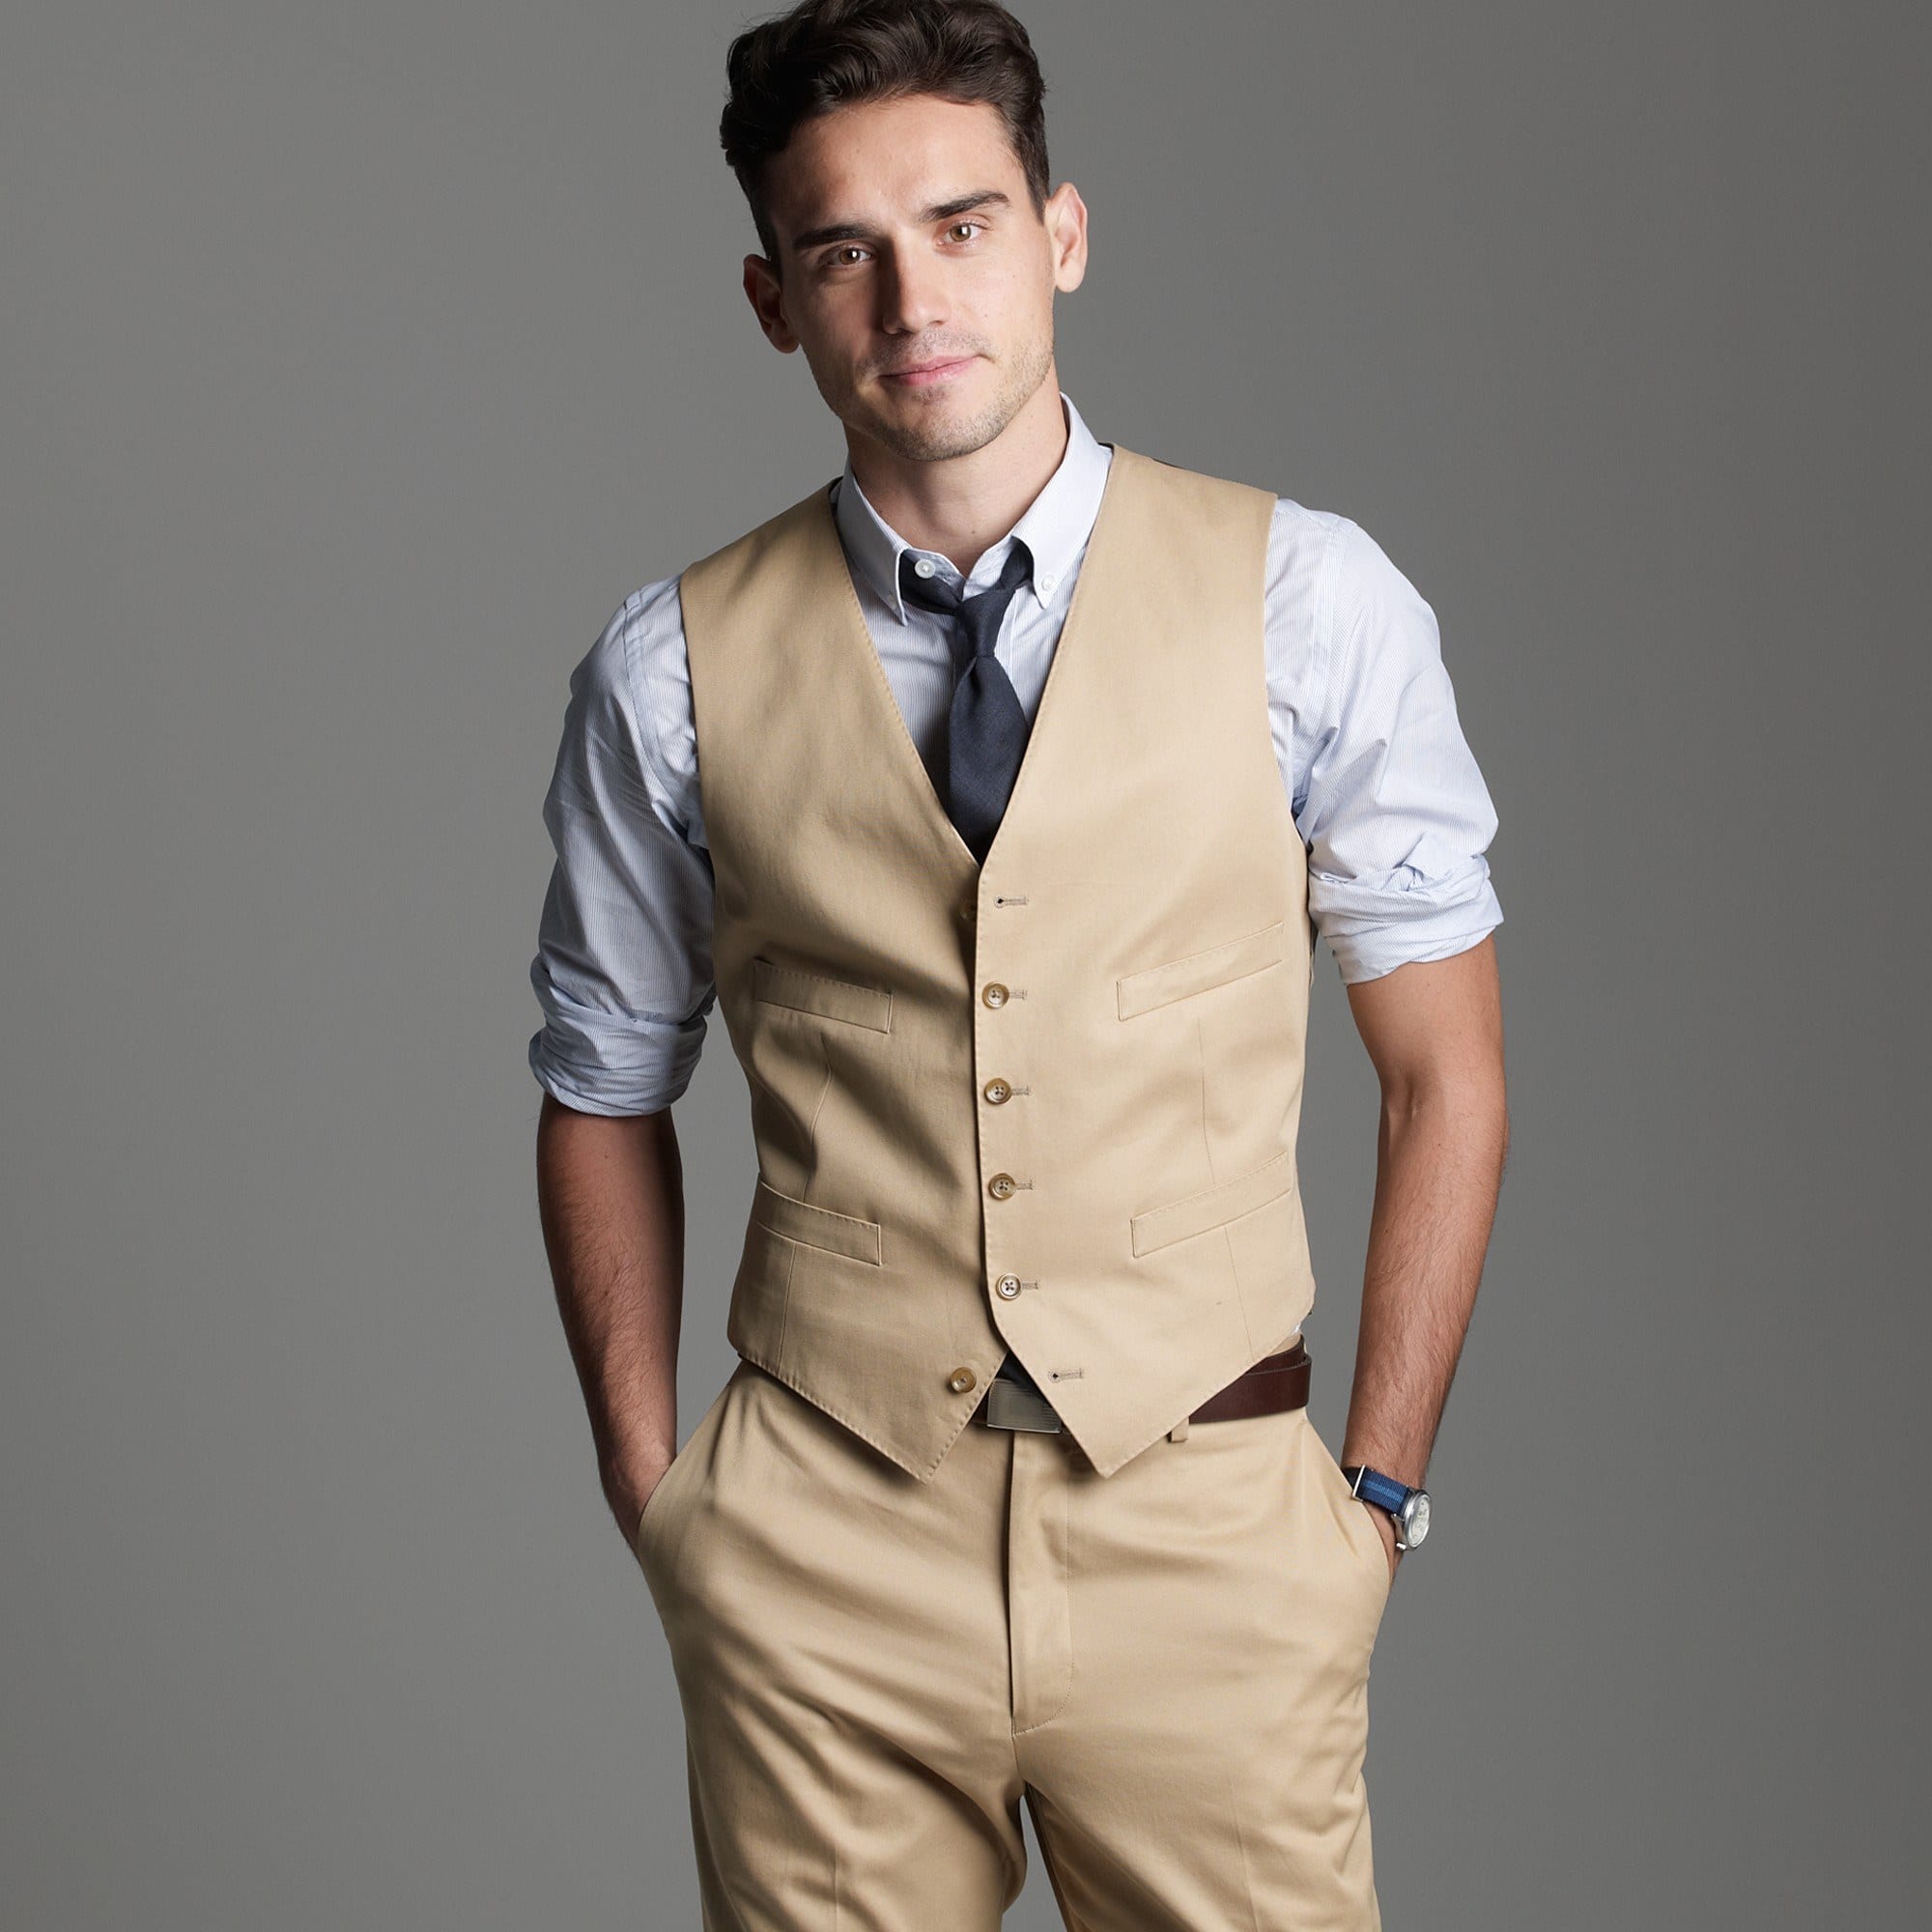 18 Best Semi Formal Outfits For Guys to Try